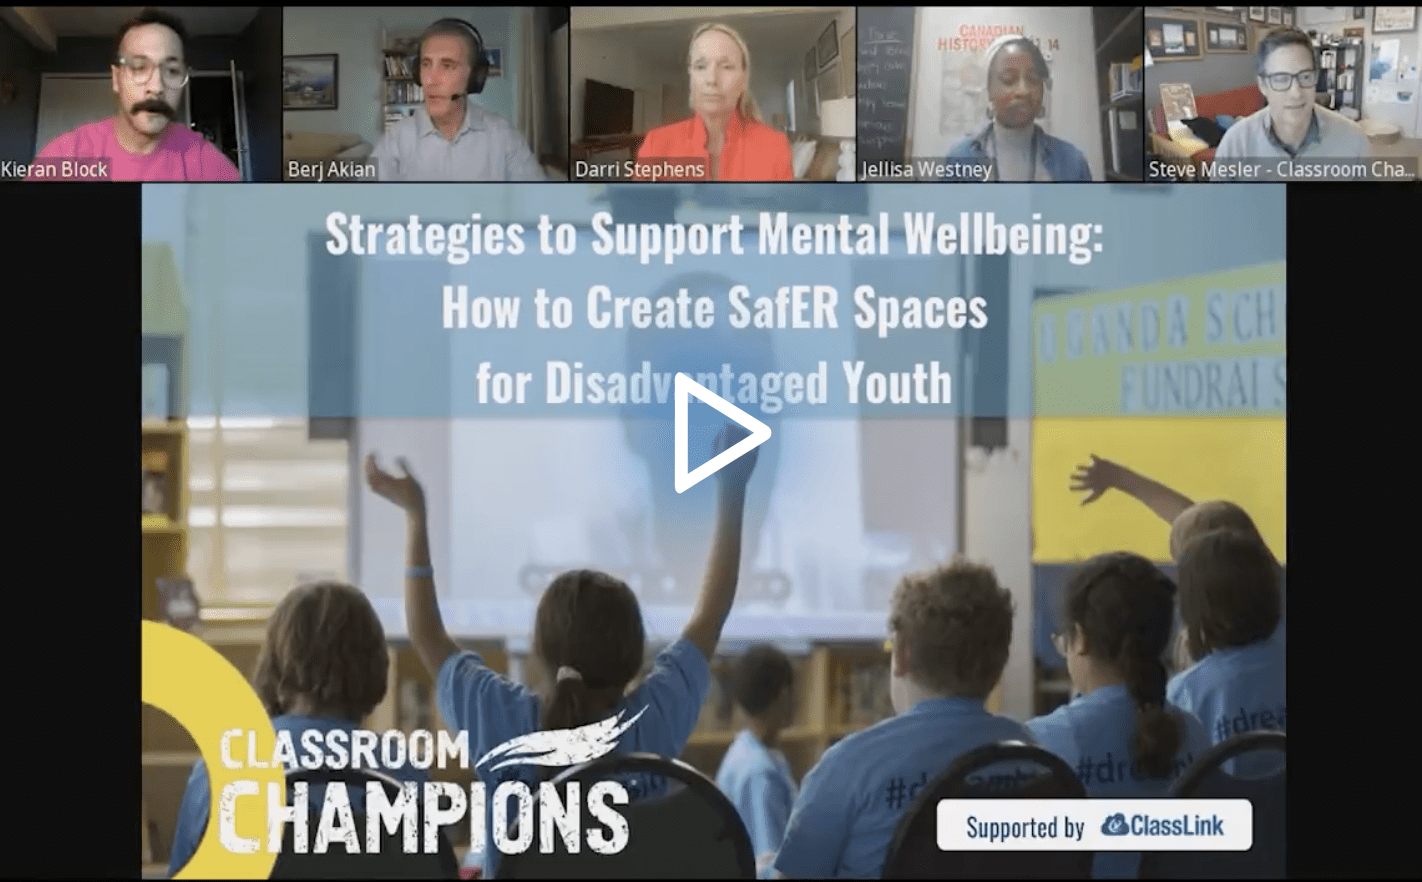 Strategies to Support Mental Wellbeing: How to Create SafER Spaces for Disadvantaged Youth edLeader Panel recording link